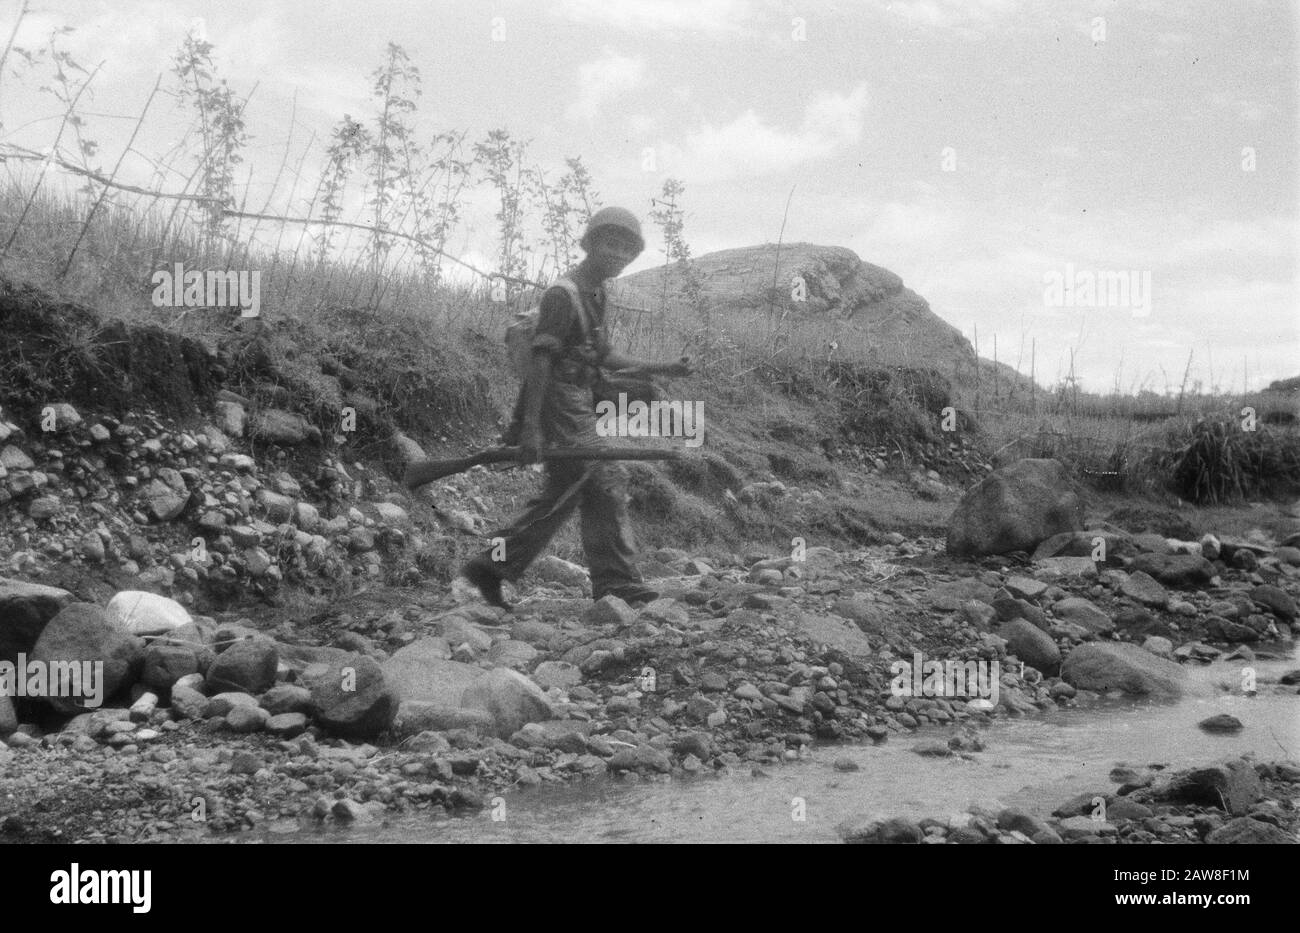 Action V-brigade, Gadja Merah [Red Elephant] to Bekal and surroundings  [Military rock bed of a potash crosses, looking in camera] Date: March 30, 1949 Location: Bekal, Indonesia, Dutch East Indies Stock Photo